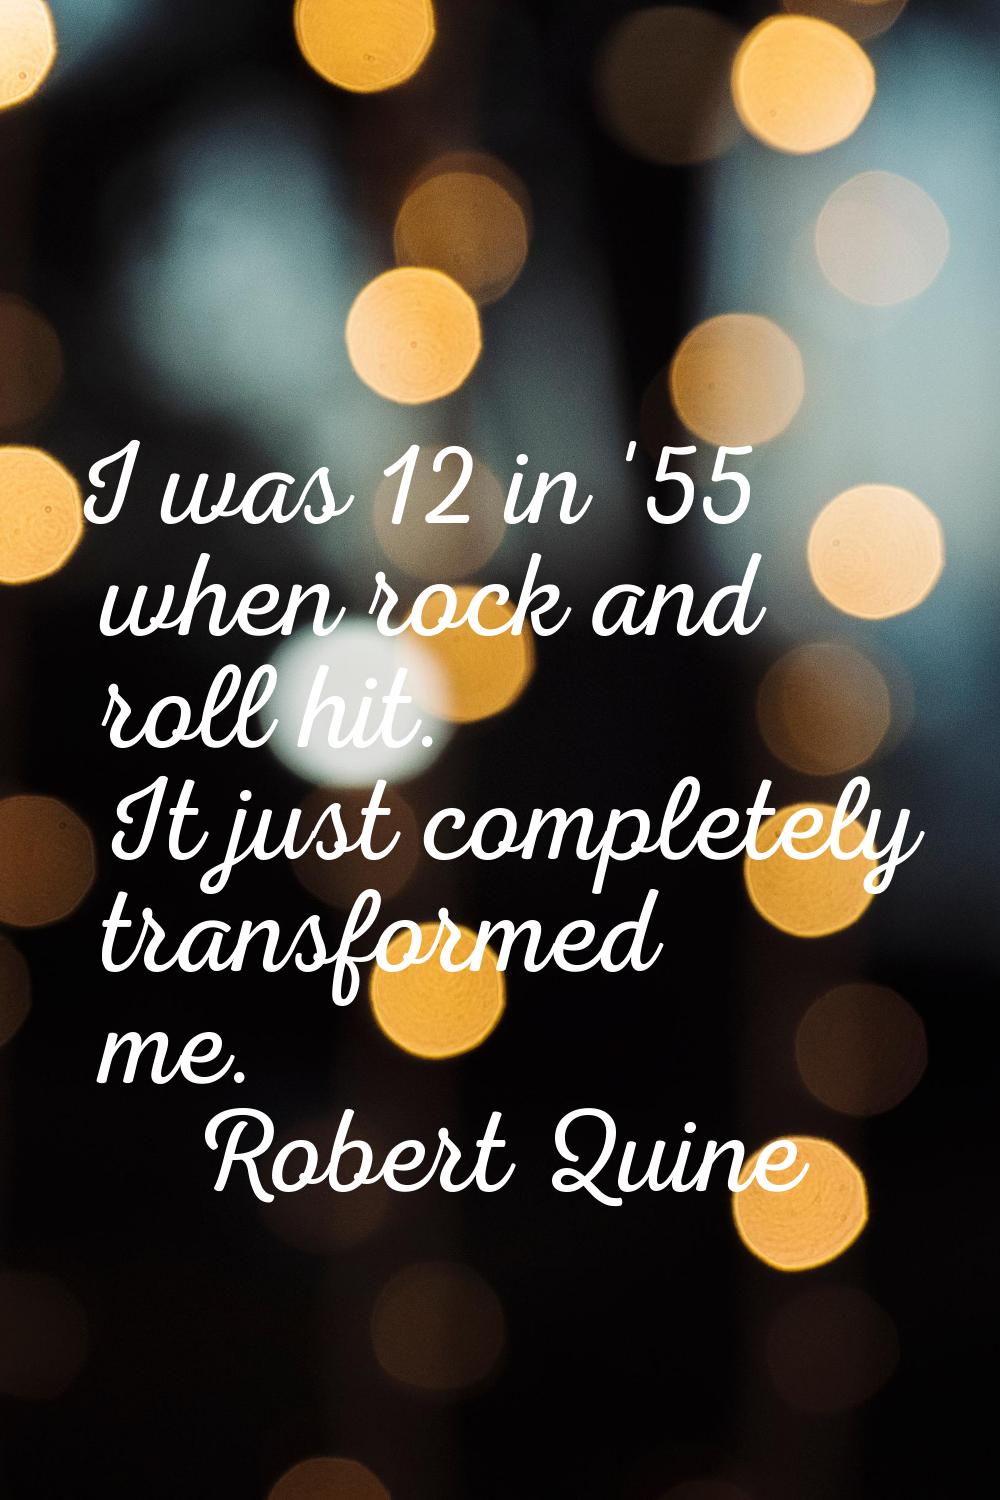 I was 12 in '55 when rock and roll hit. It just completely transformed me.